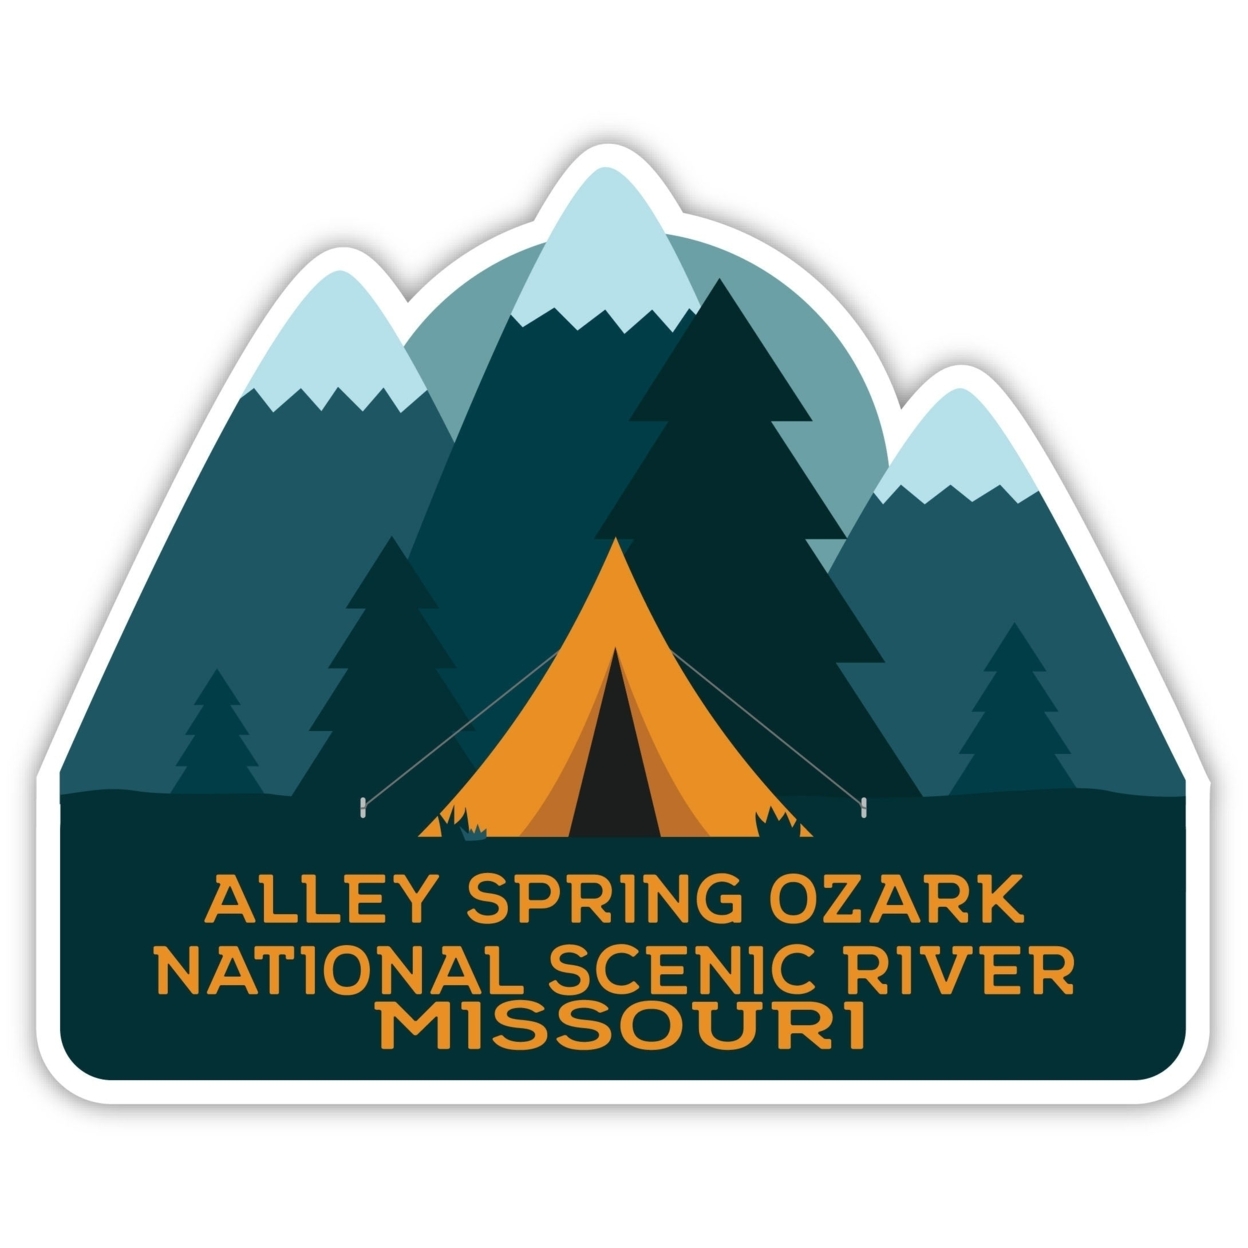 Alley Spring Ozark National Scenic River Missouri Souvenir Decorative Stickers (Choose Theme And Size) - 4-Pack, 6-Inch, Tent